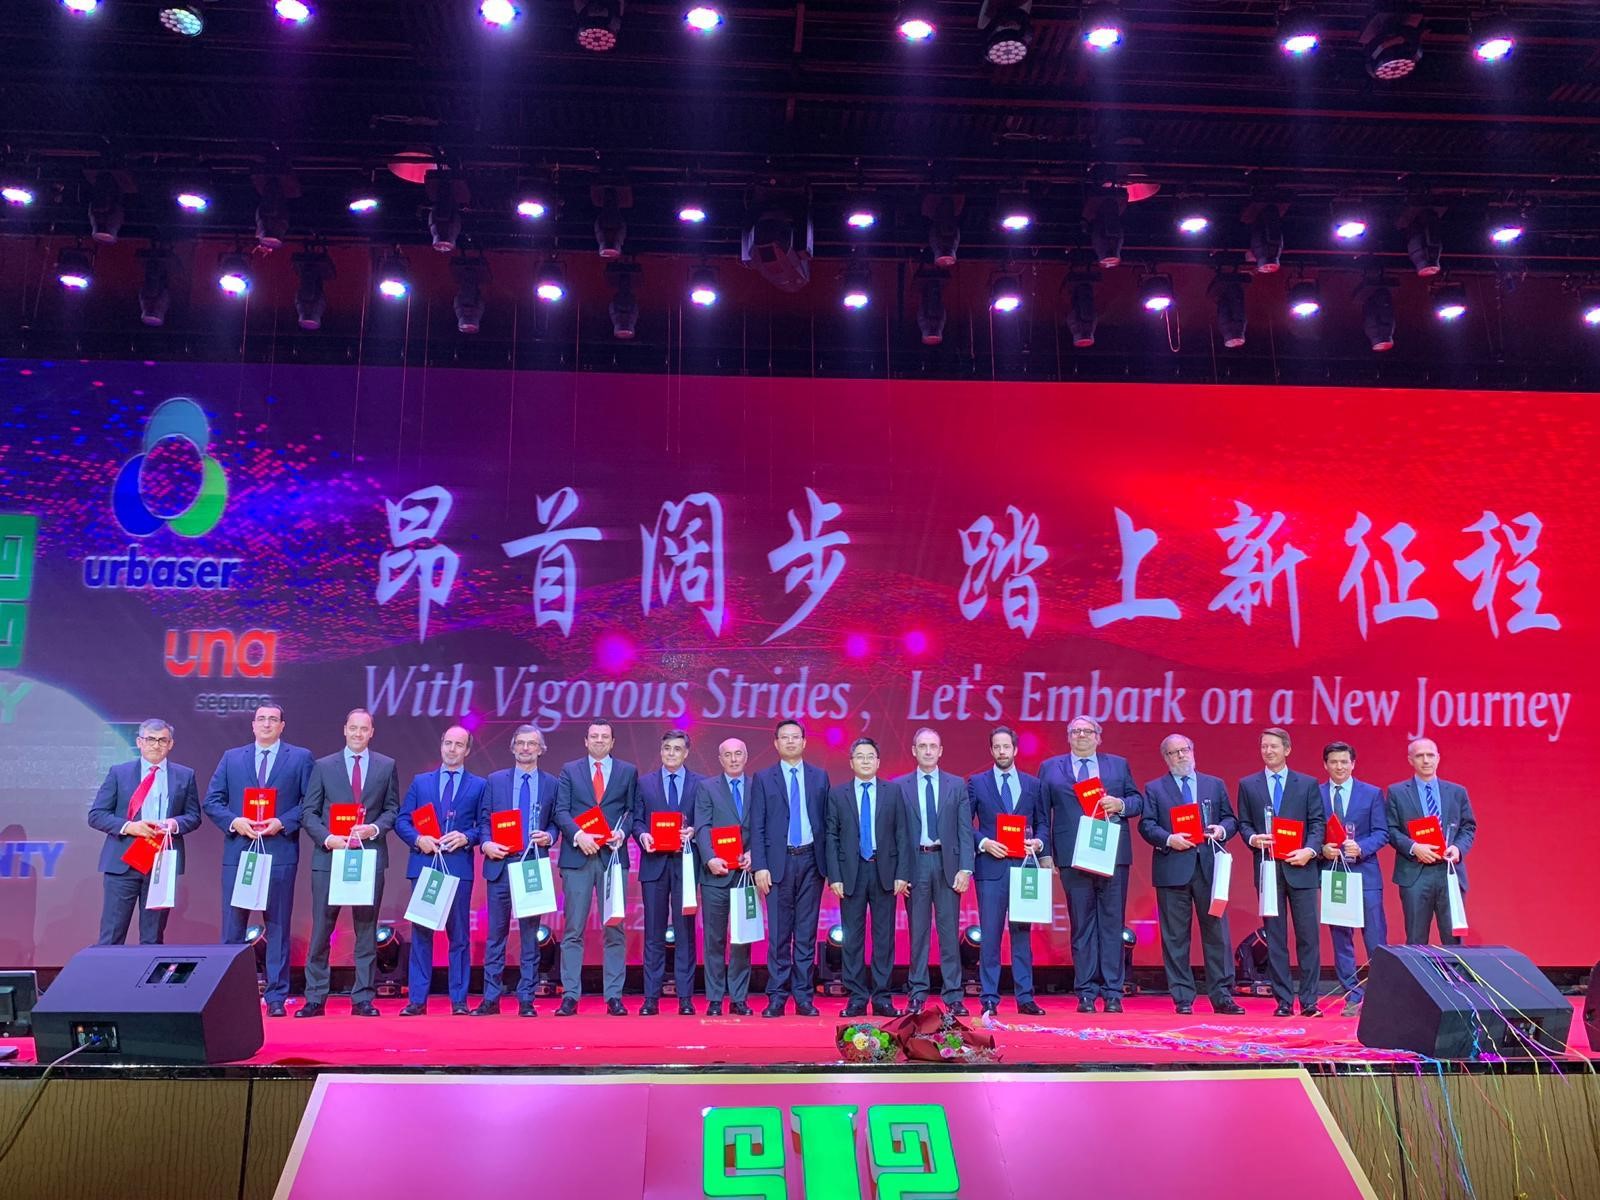 Award ceremony of the “Christopher Columbus” prize by Chairman Yan Shengjun to the Urbaser Country Managers